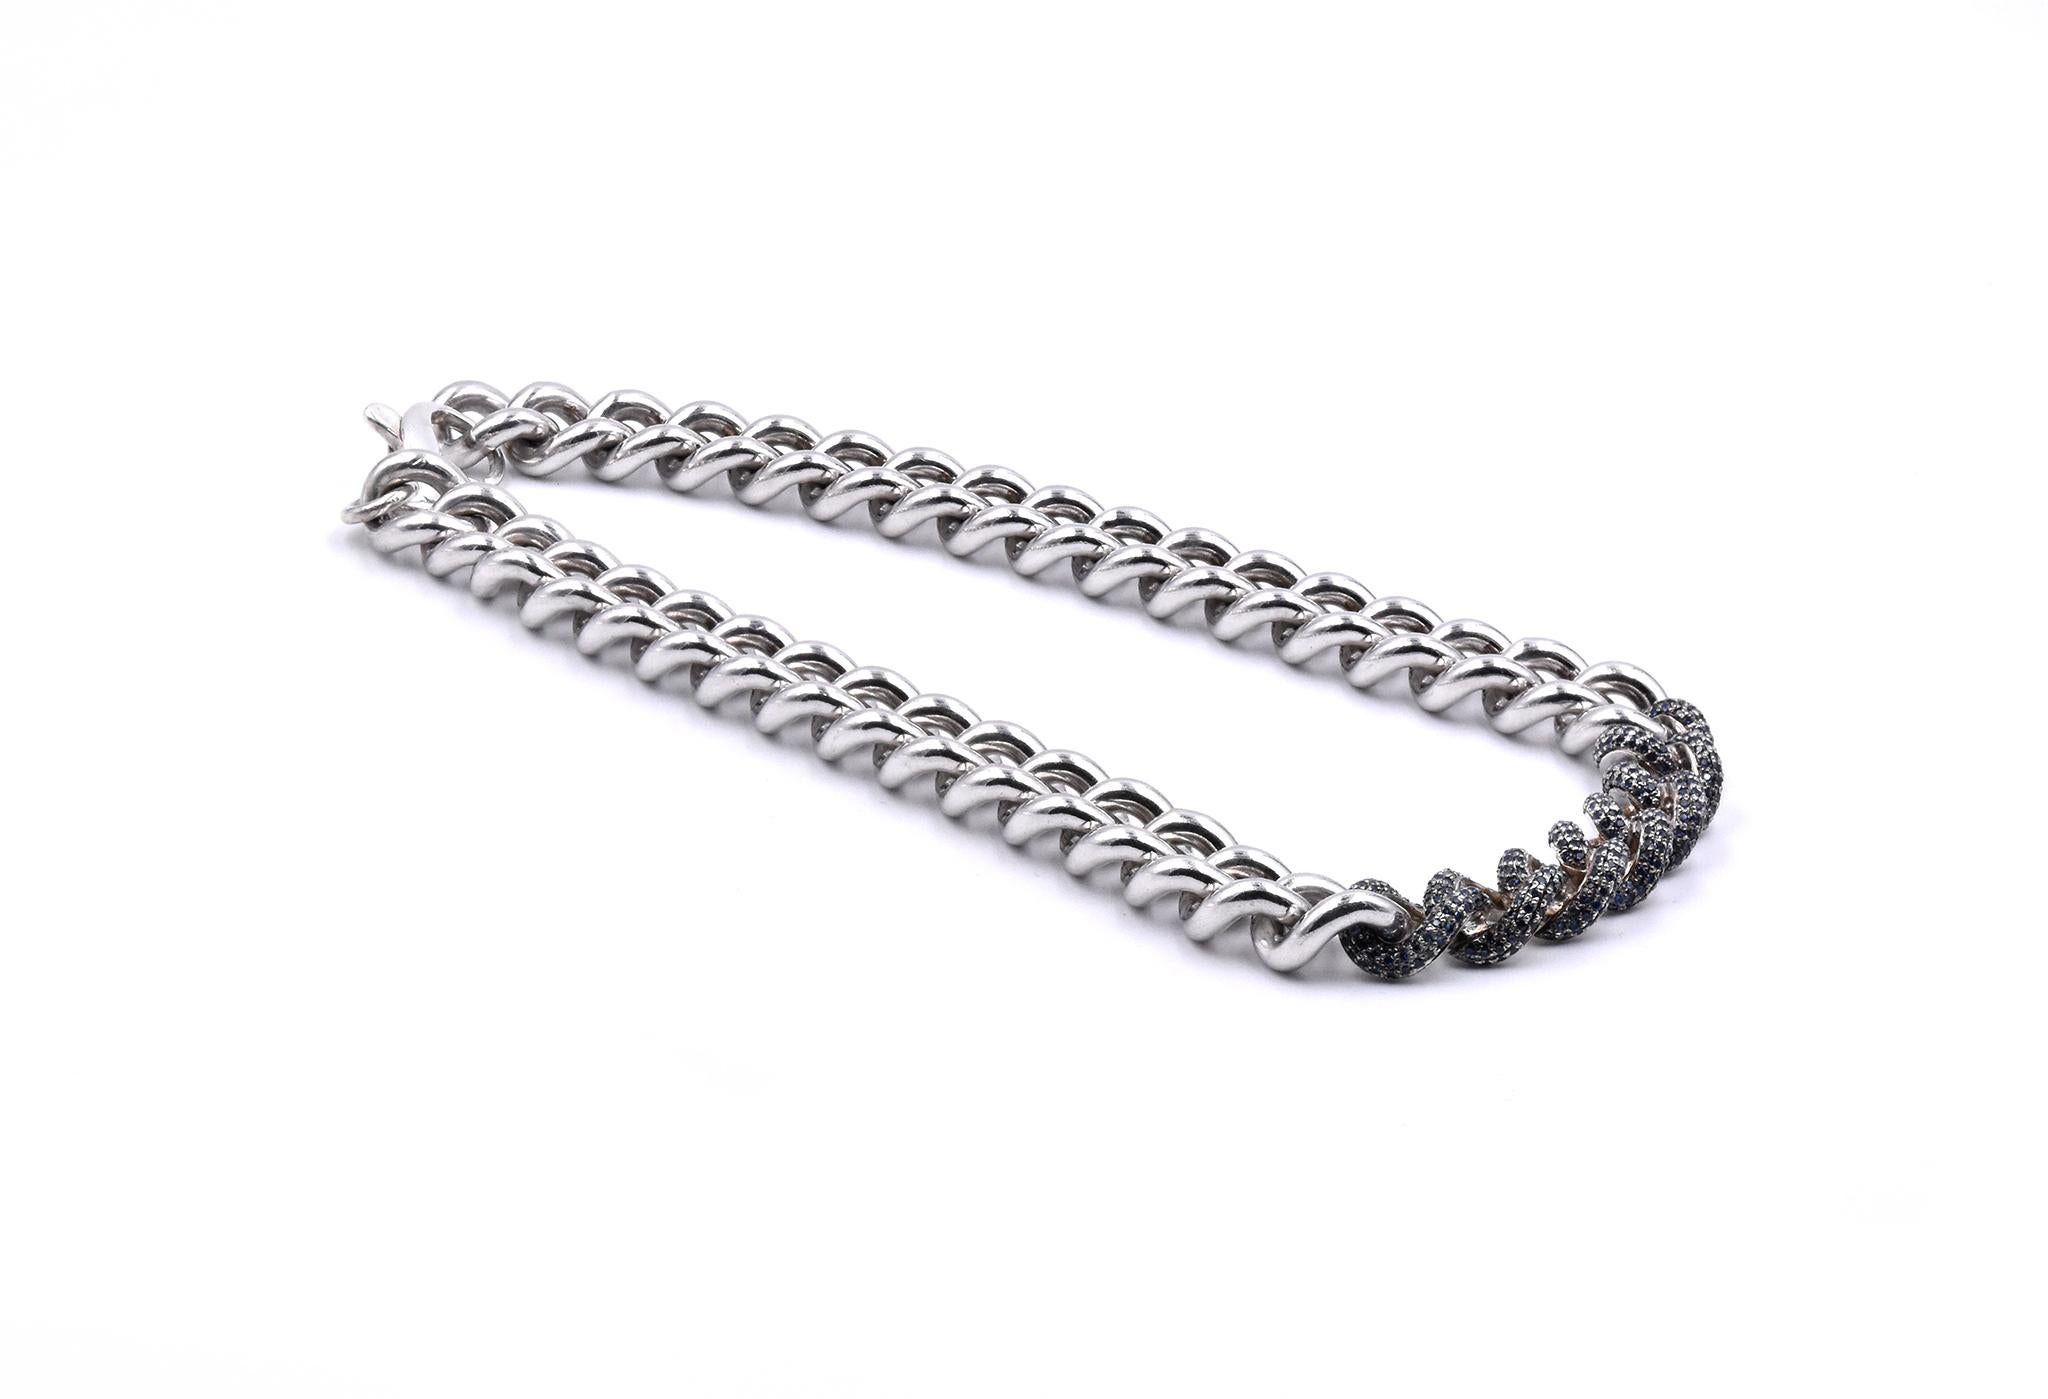 Material: sterling silver
Dimensions: necklace measures 18-inches, links measure 15mm wide
Weight: 216.21 grams
